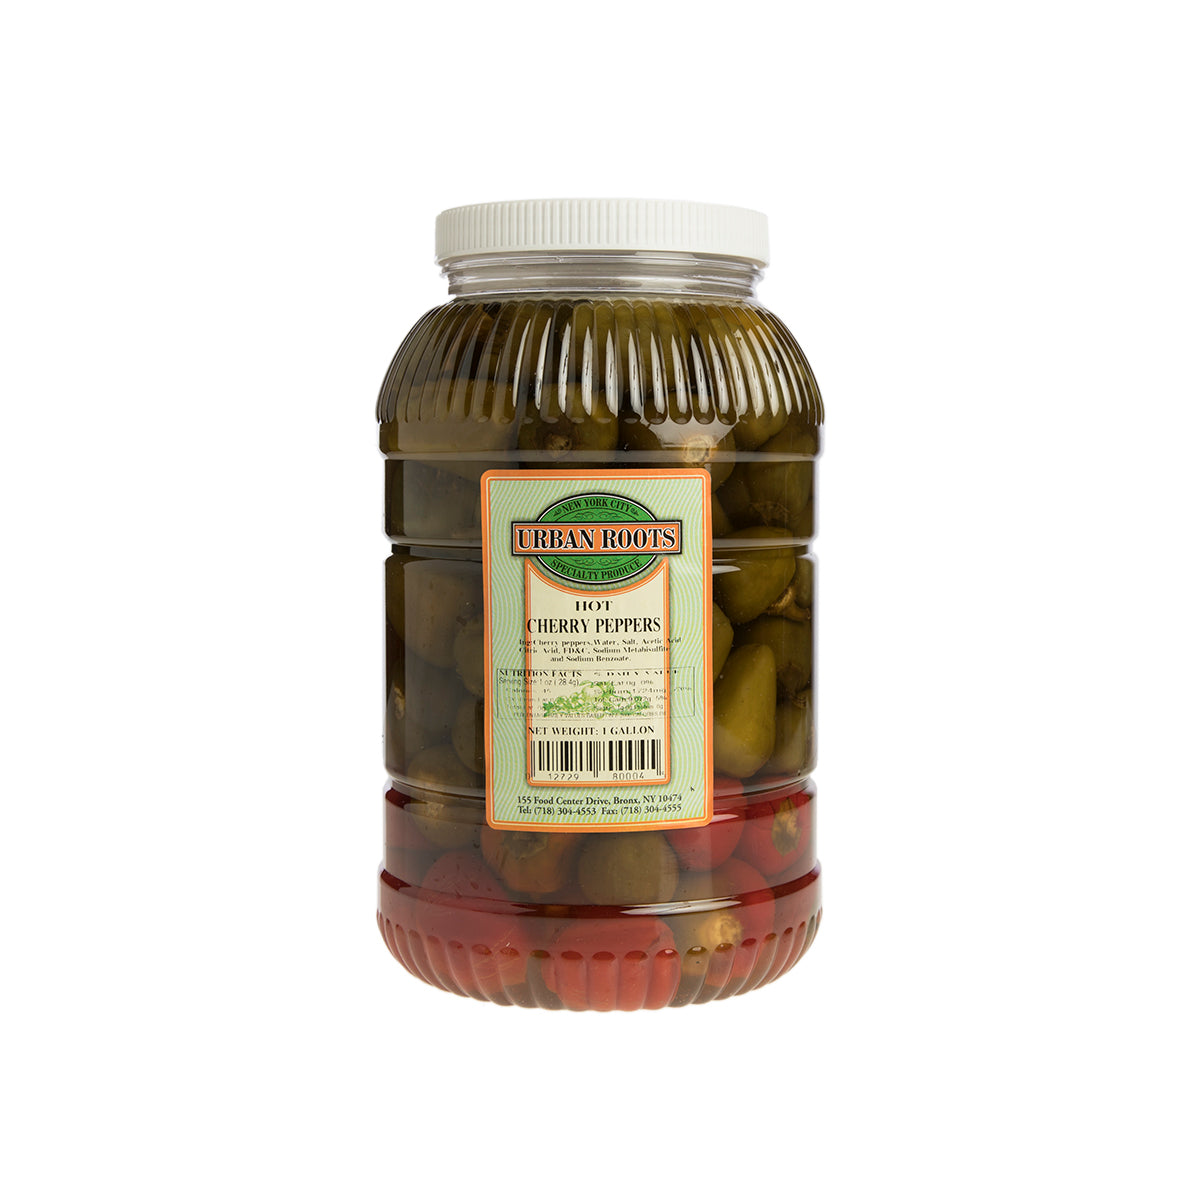 Urban Roots Hot Cherry Peppers 128oz Jar